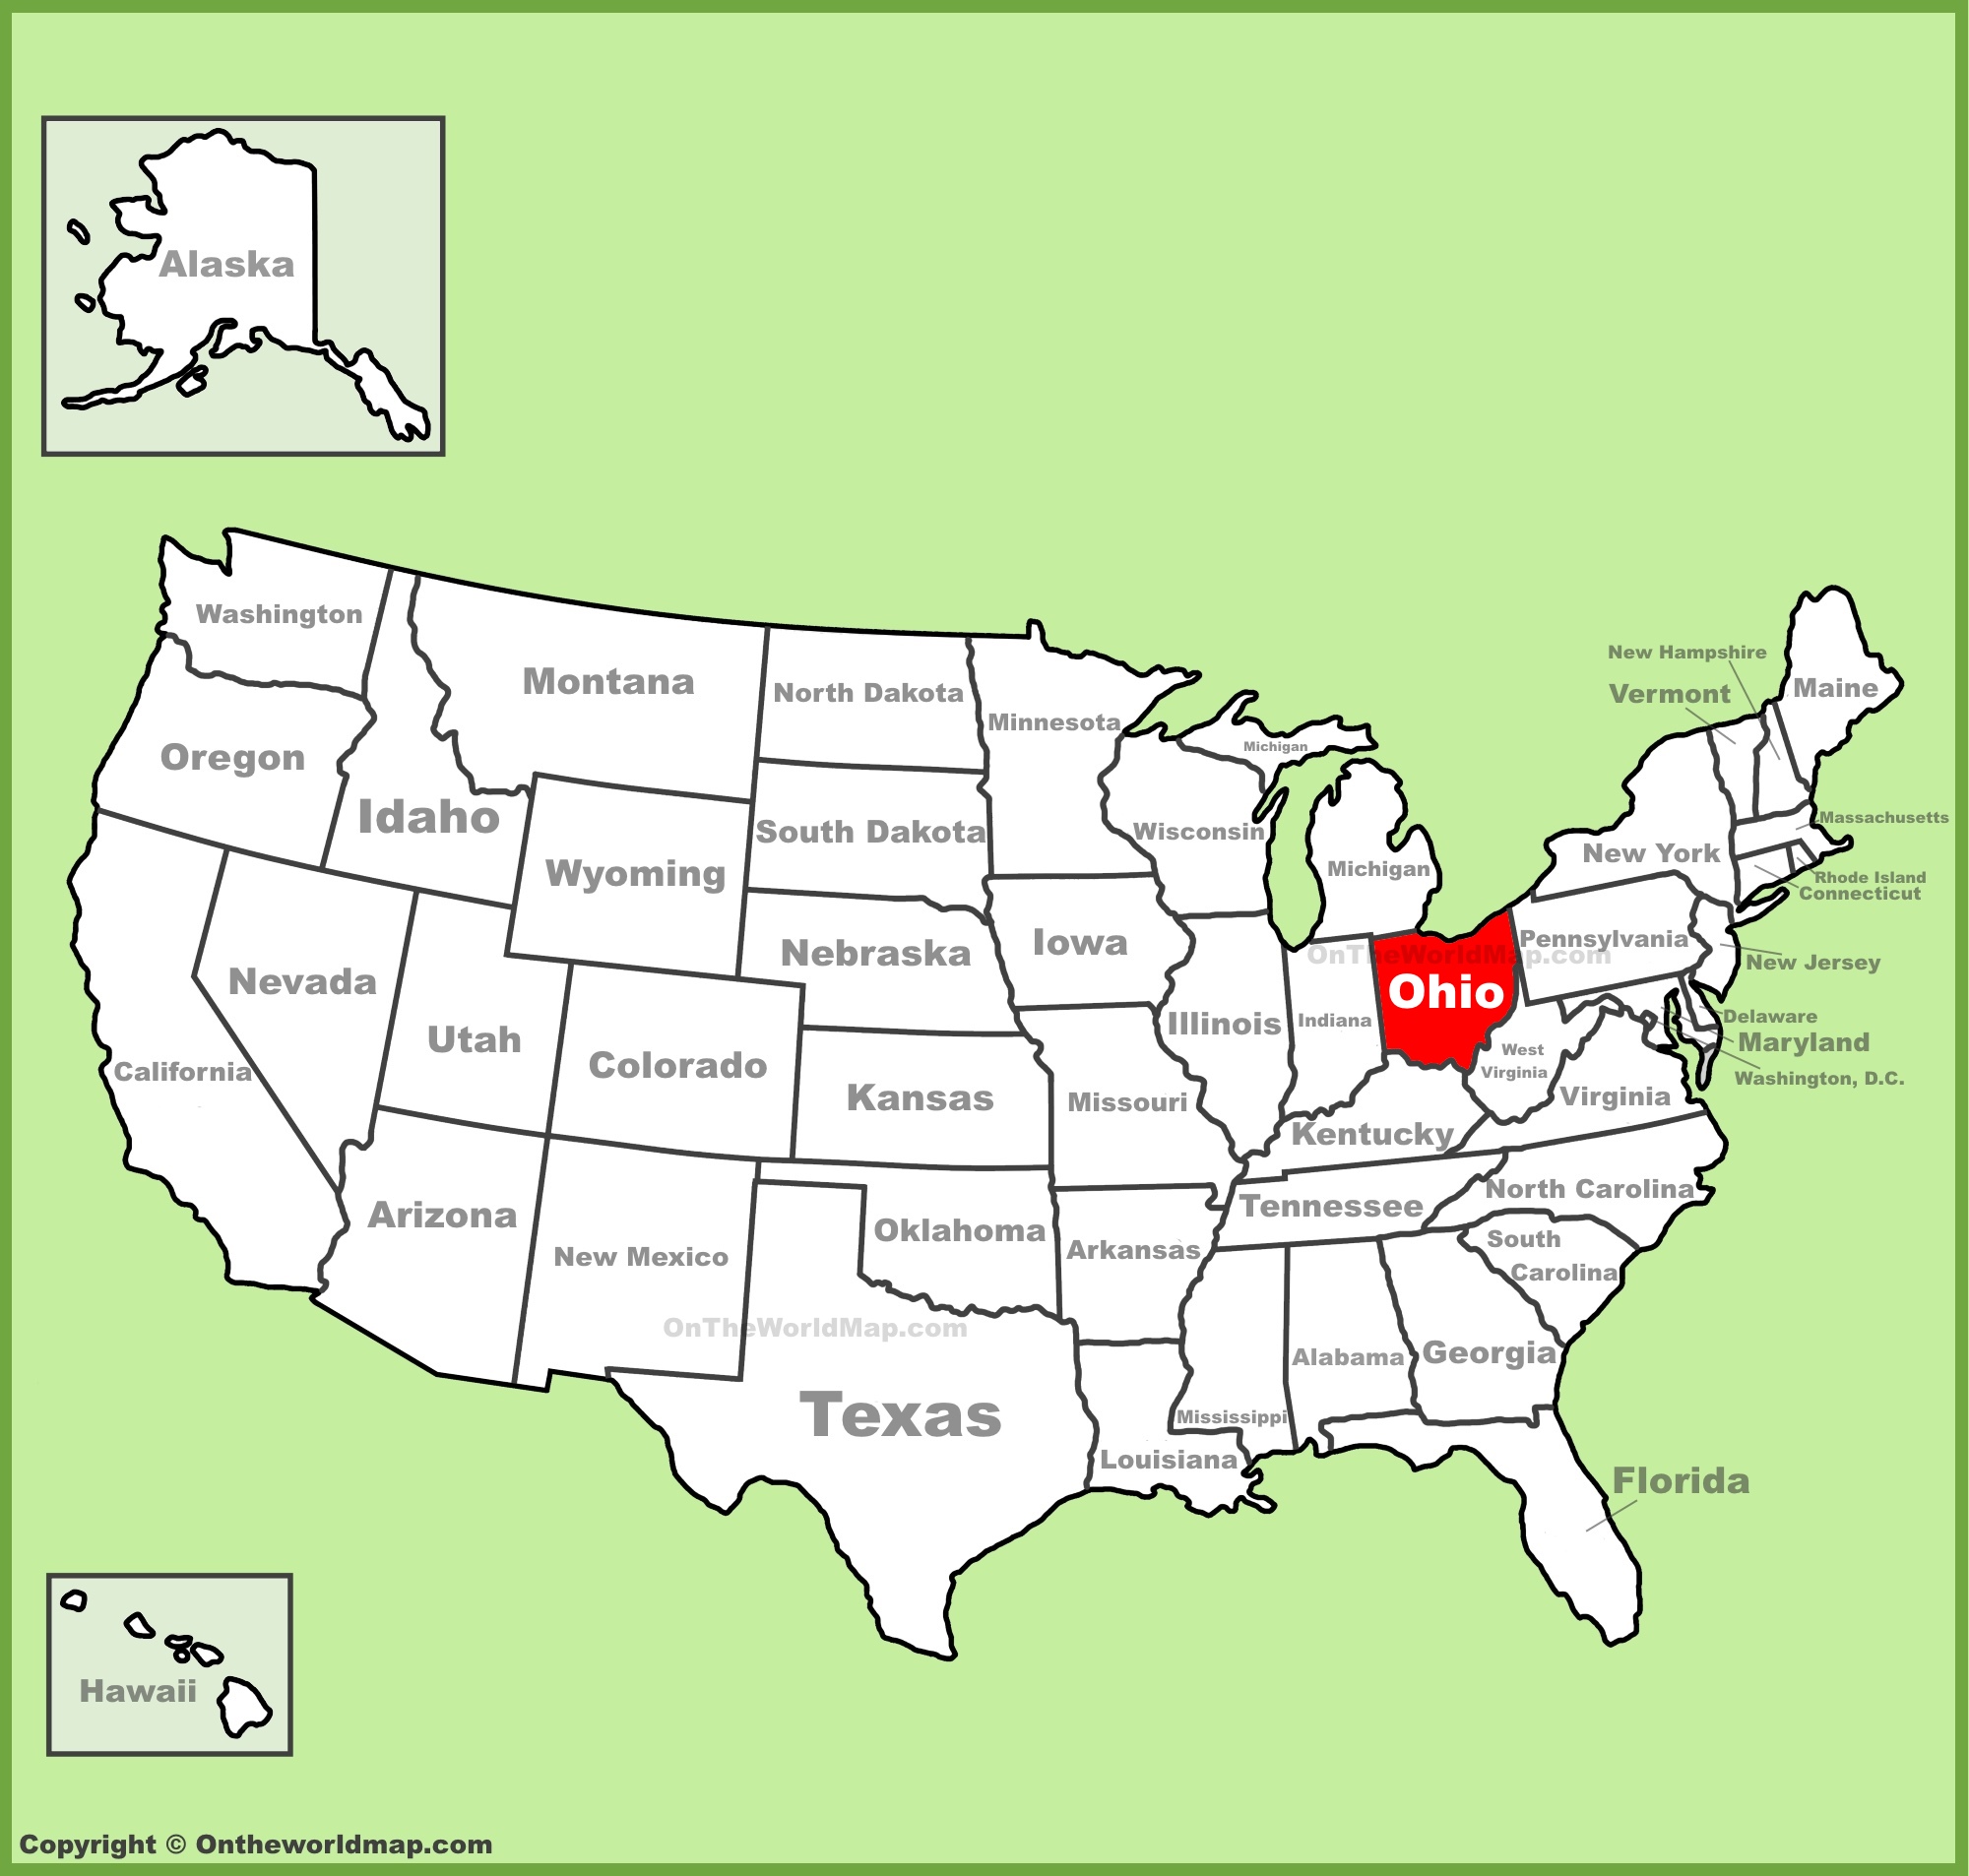 Description: This map shows where Ohio is located on the U.S. Map. 